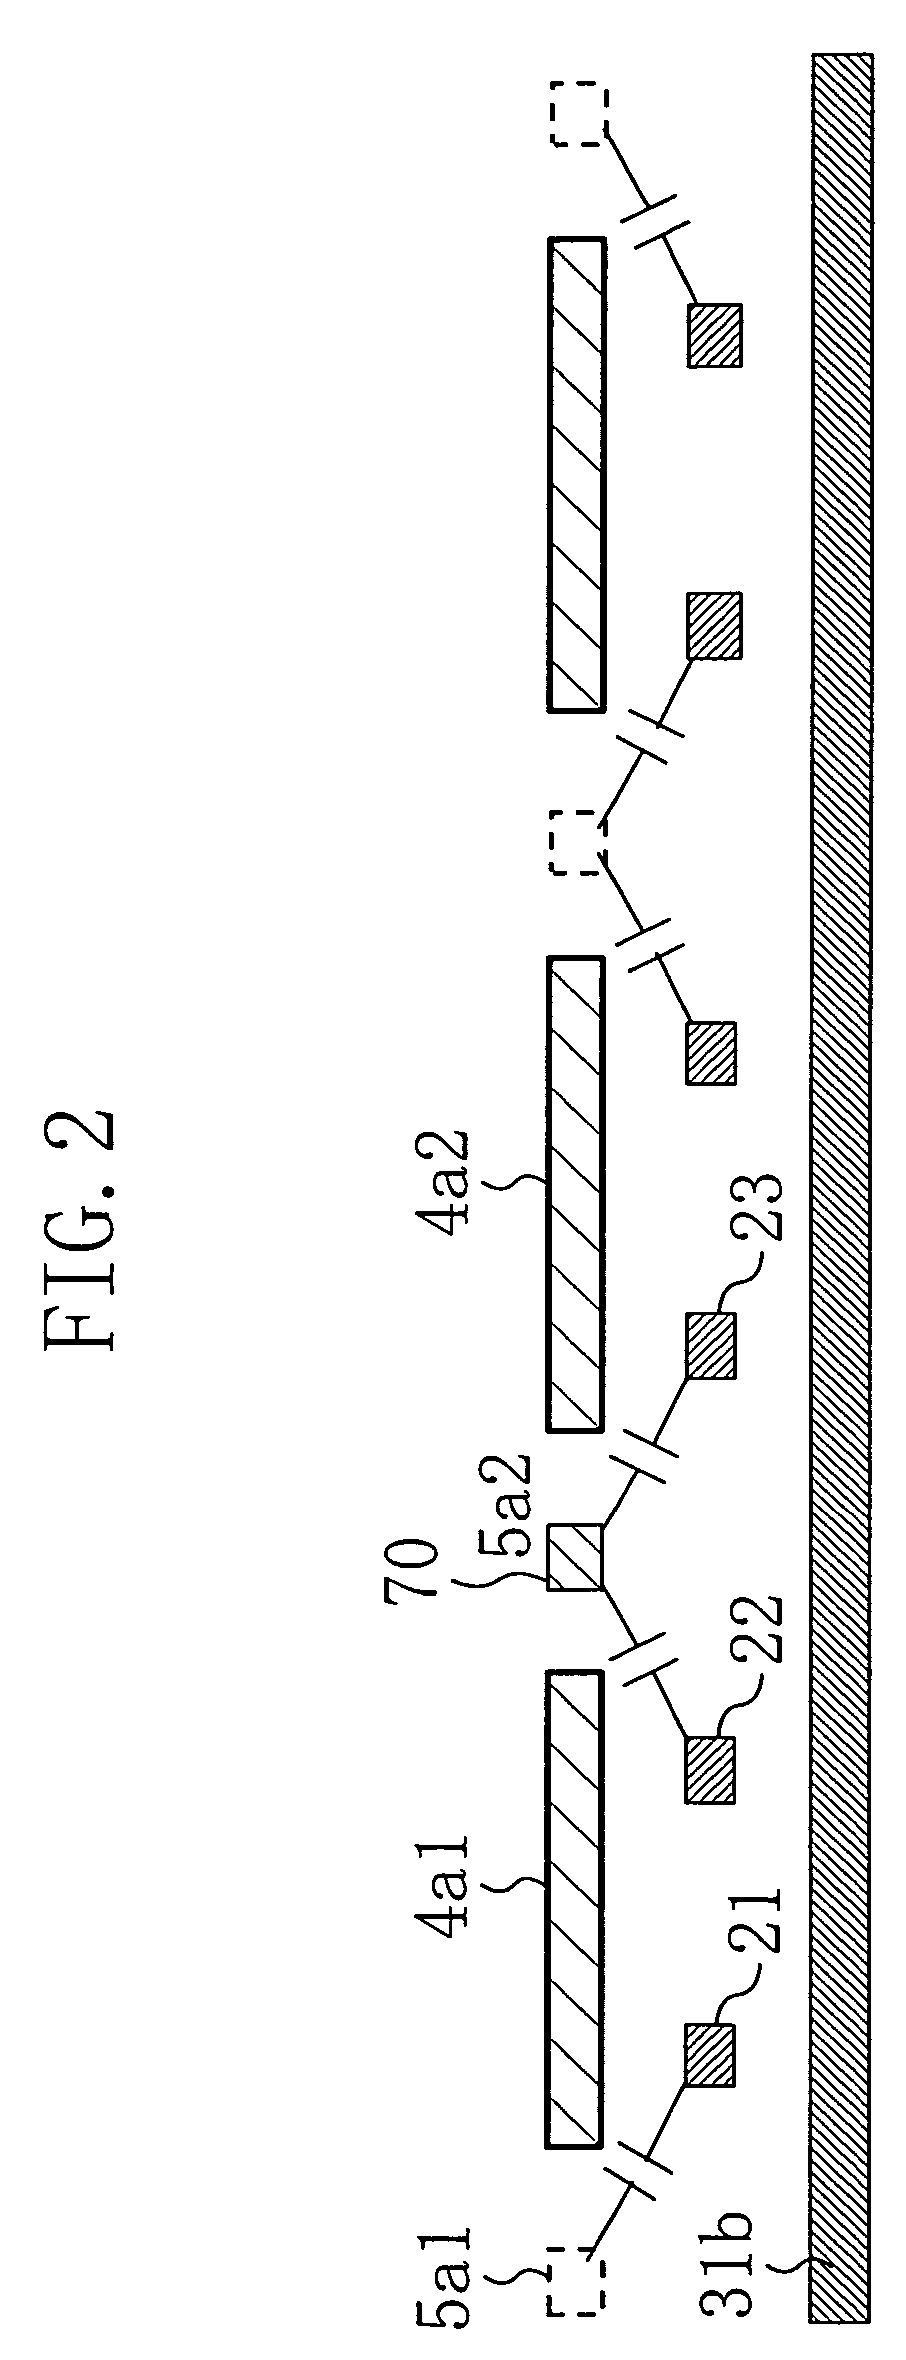 Semiconductor device having a layout configuration for minimizing crosstalk